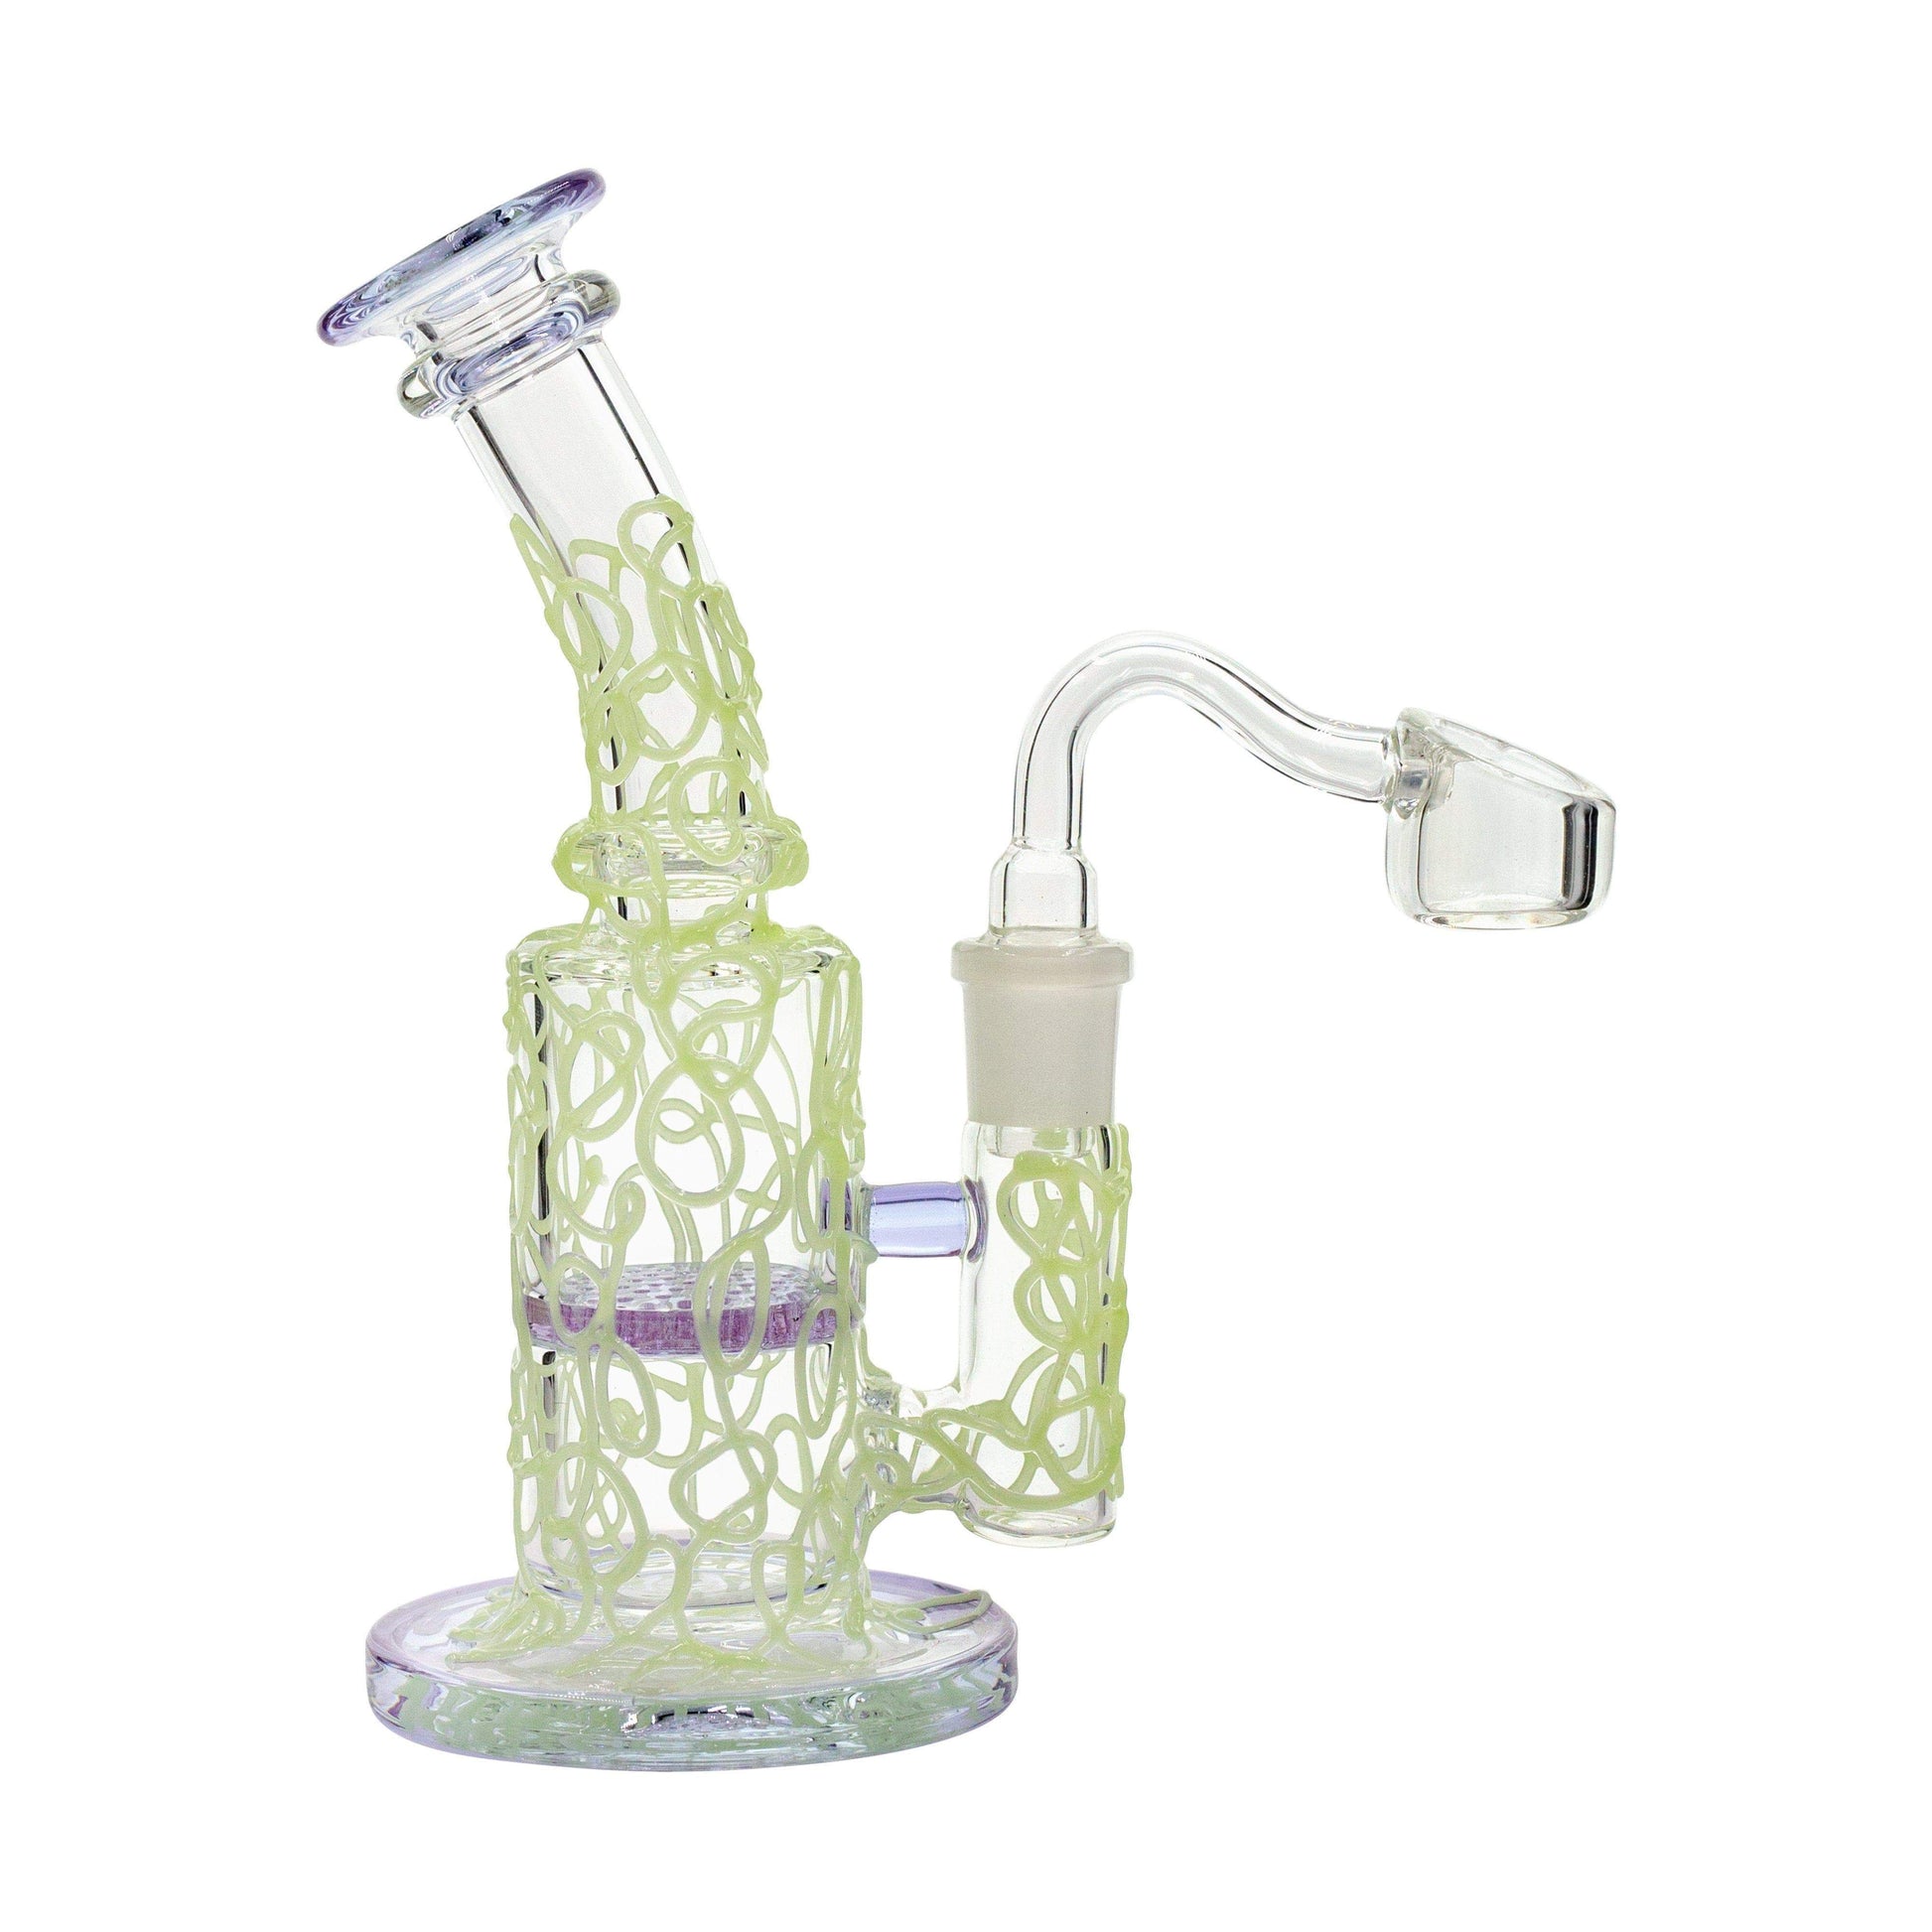 Petite 7-inch glass dab rig smoking device with glow in the dark accents honeycomb perc